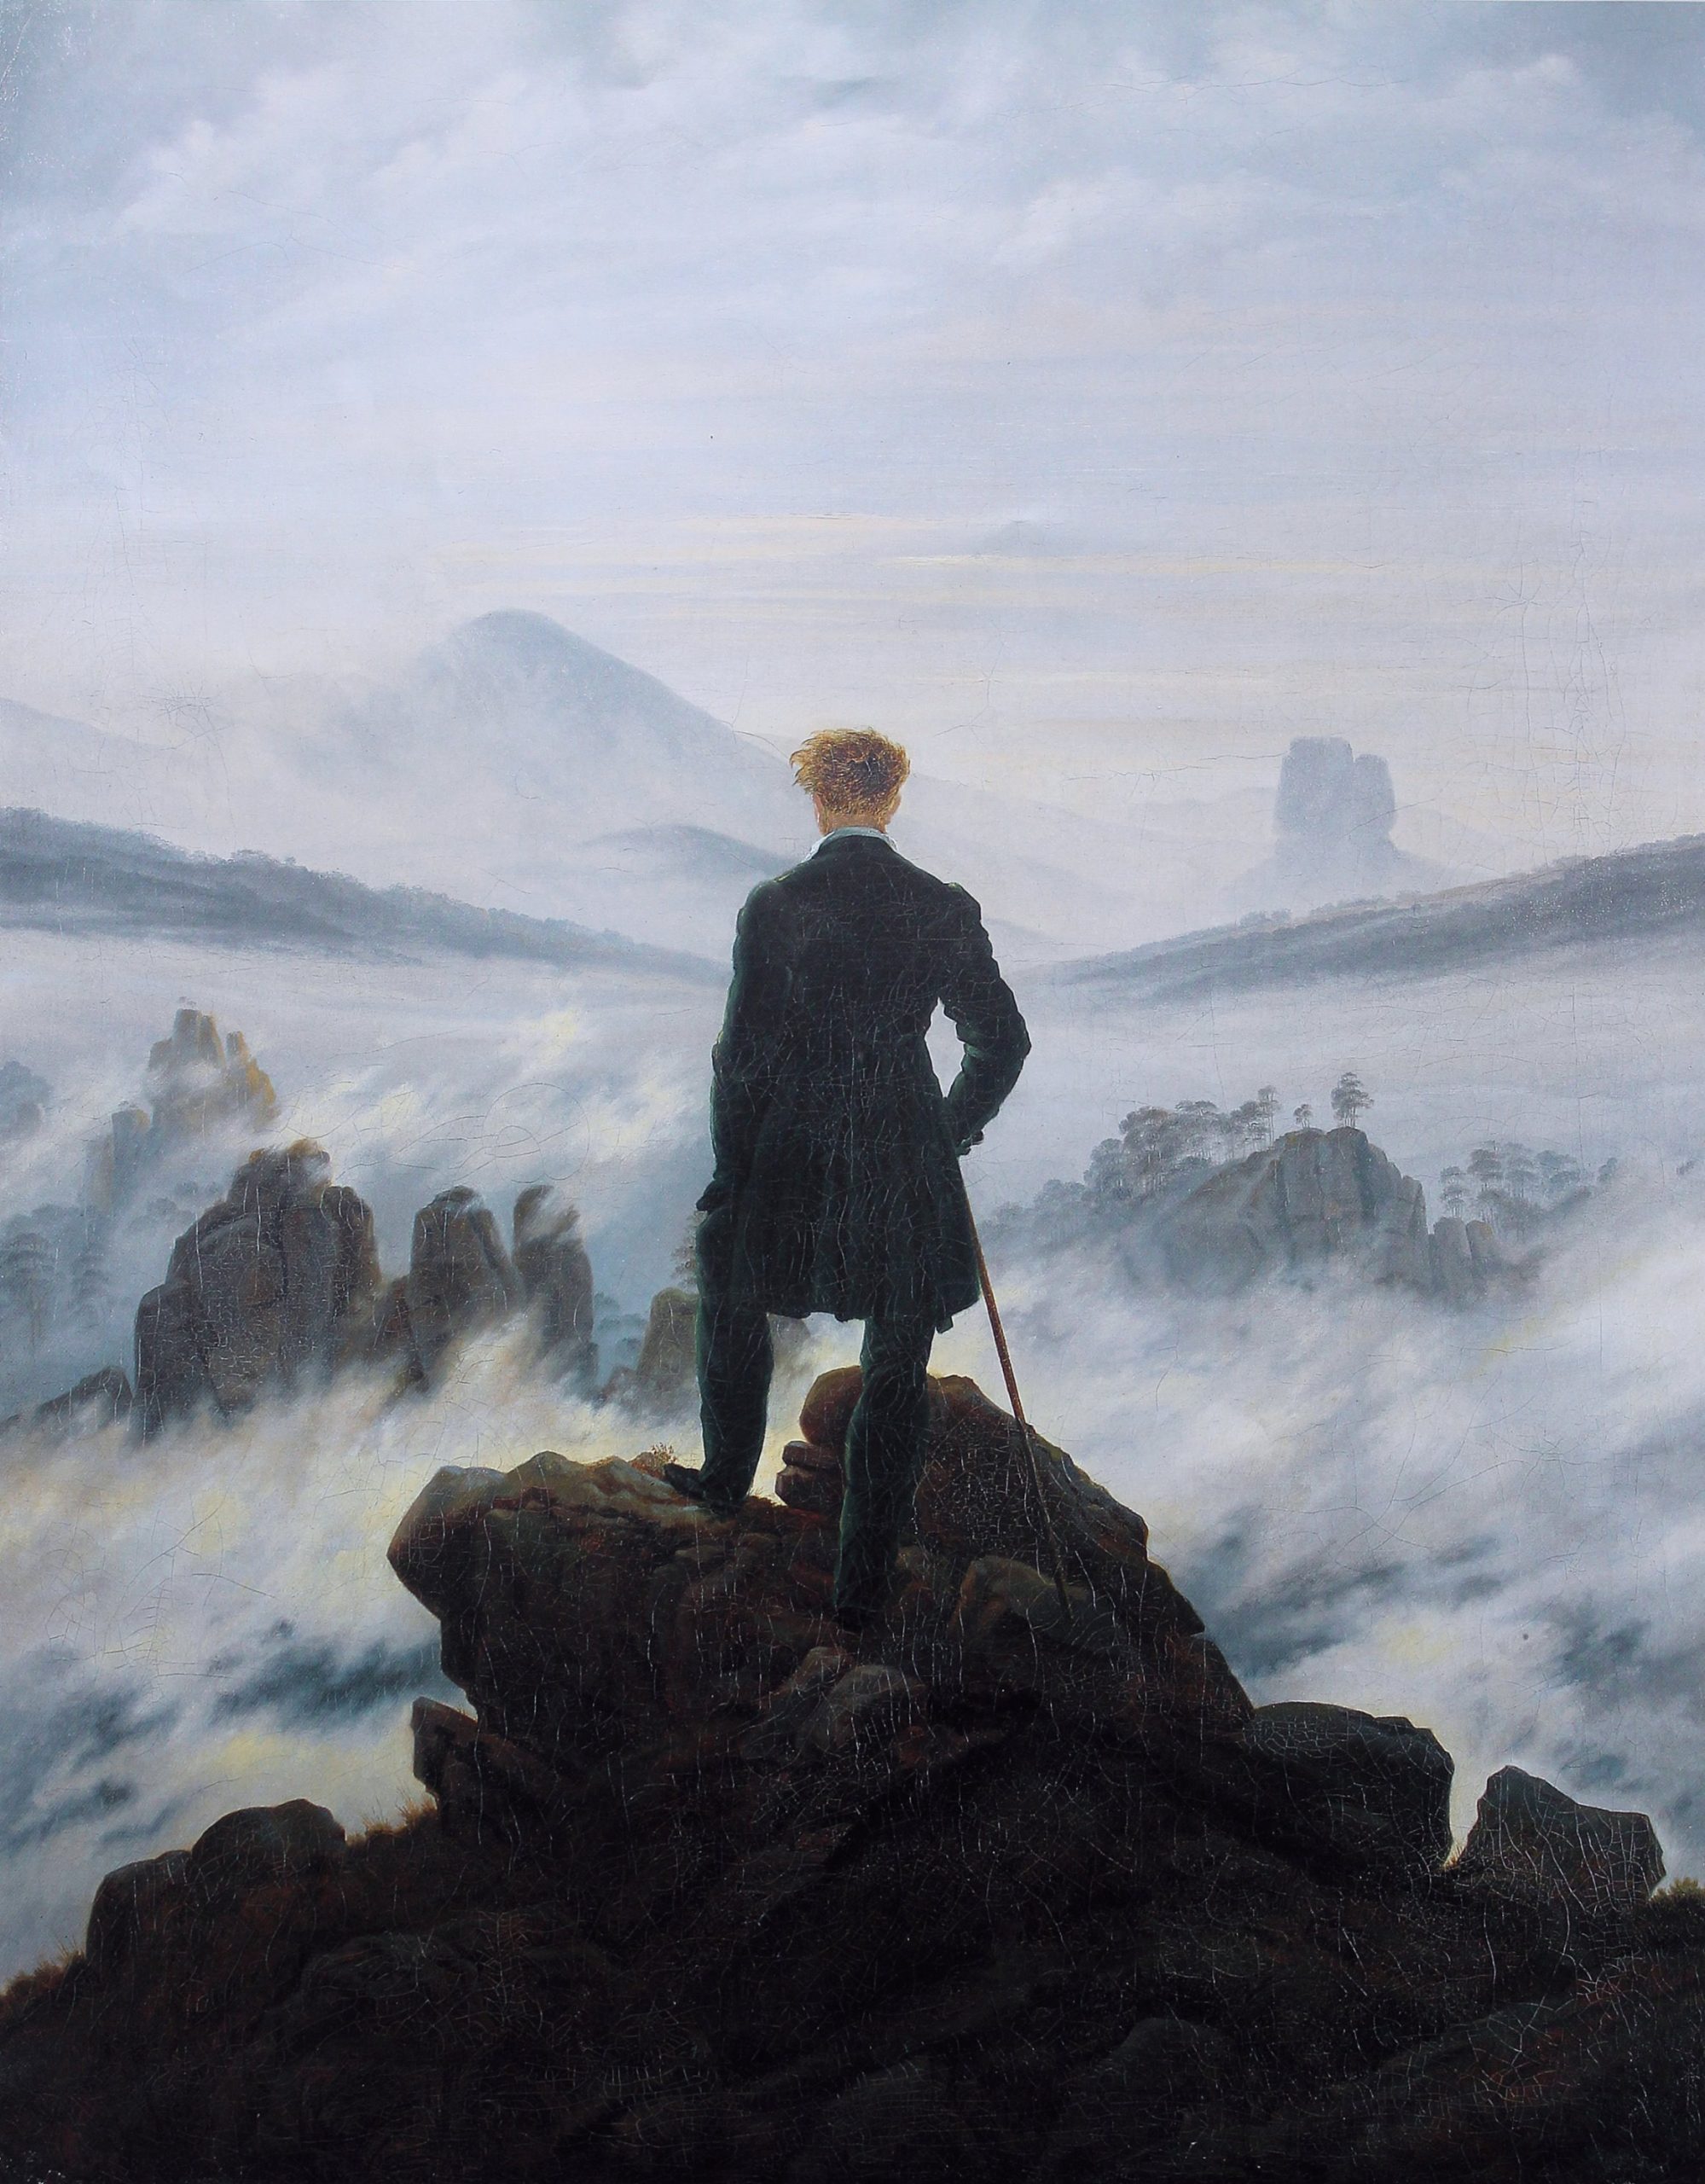 A man whose back is turned towards the viewer standing on a rock before a violent sea